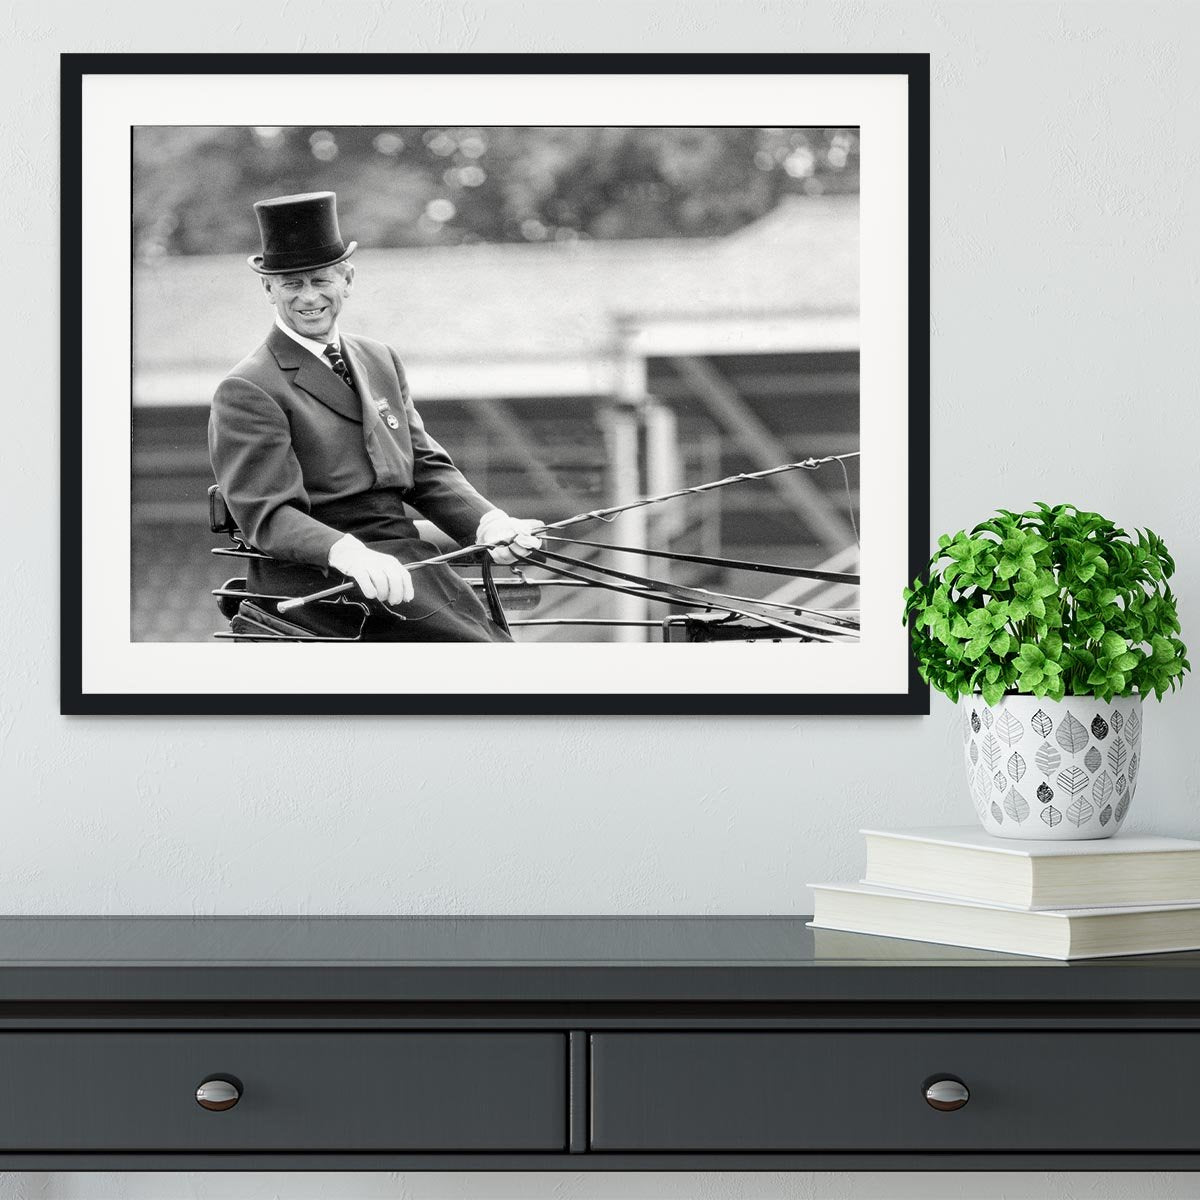 Prince Philip driving a carriage during a race at Ascot Framed Print - Canvas Art Rocks - 1